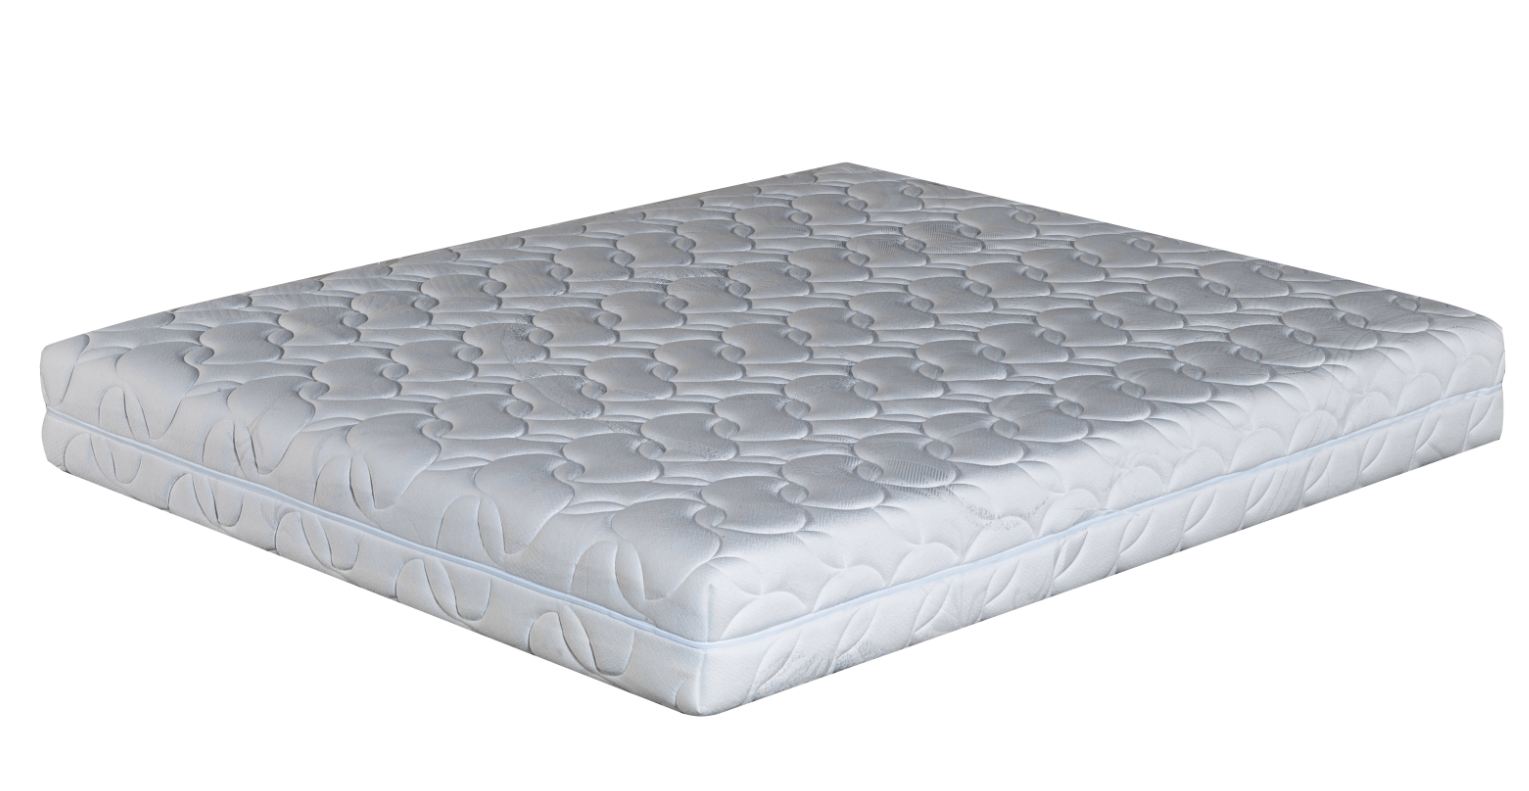 How To Find the Best Latex Mattress